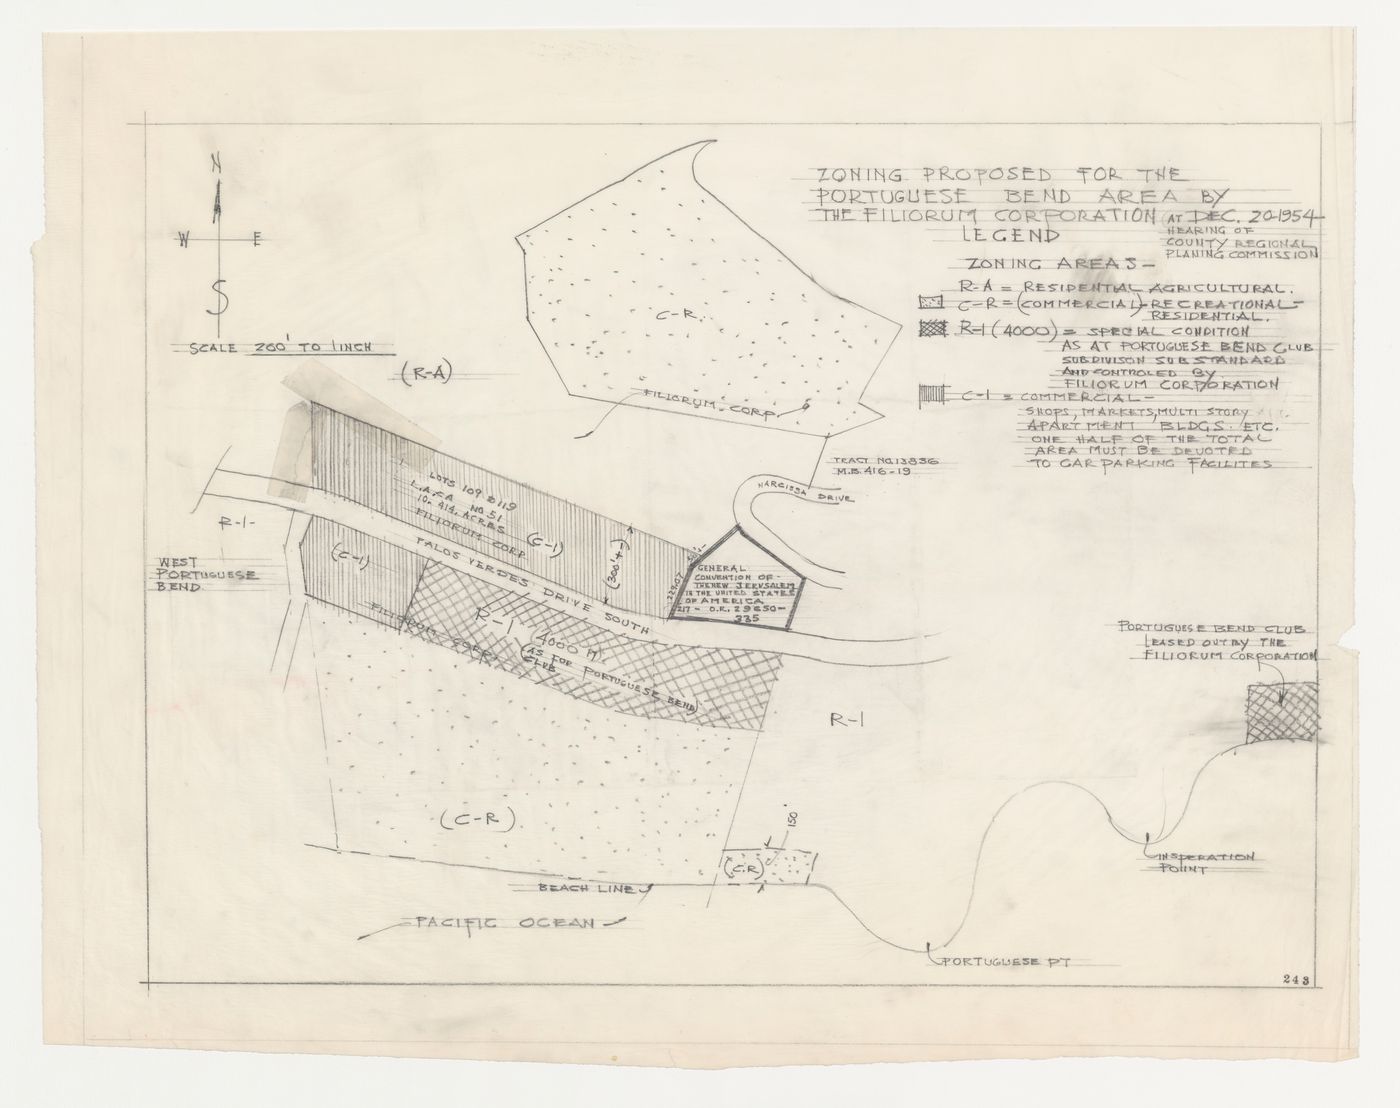 Wayfarers' Chapel, Palos Verdes, California: Zoning map showing a proposal for Filiorum Corporation property to the south and west of the chapel site